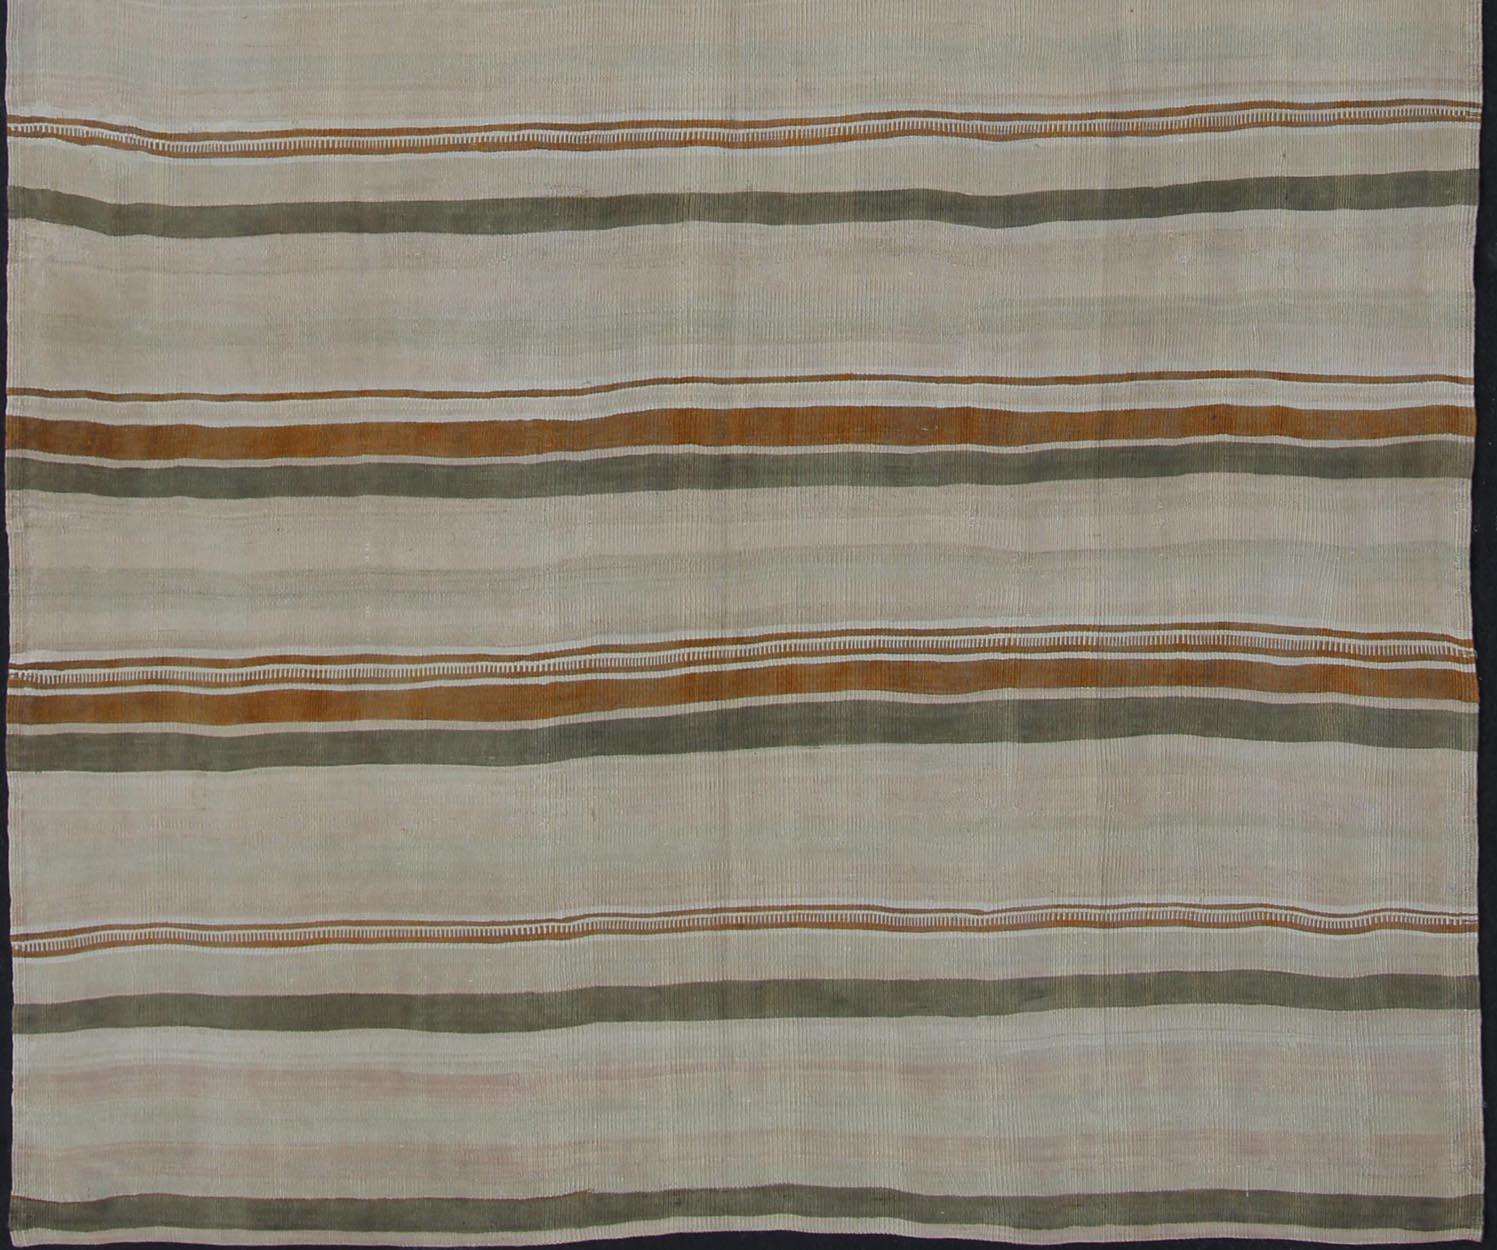 Vintage Turkish flat-woven Kilim with Minimalist stripe design, rug en-141237, country of origin / type: Turkey / Kilim, circa 1950.

This kilim consists of a Minimalist stripe design, rendered in masculine hues, such as green-toned gray, orange,